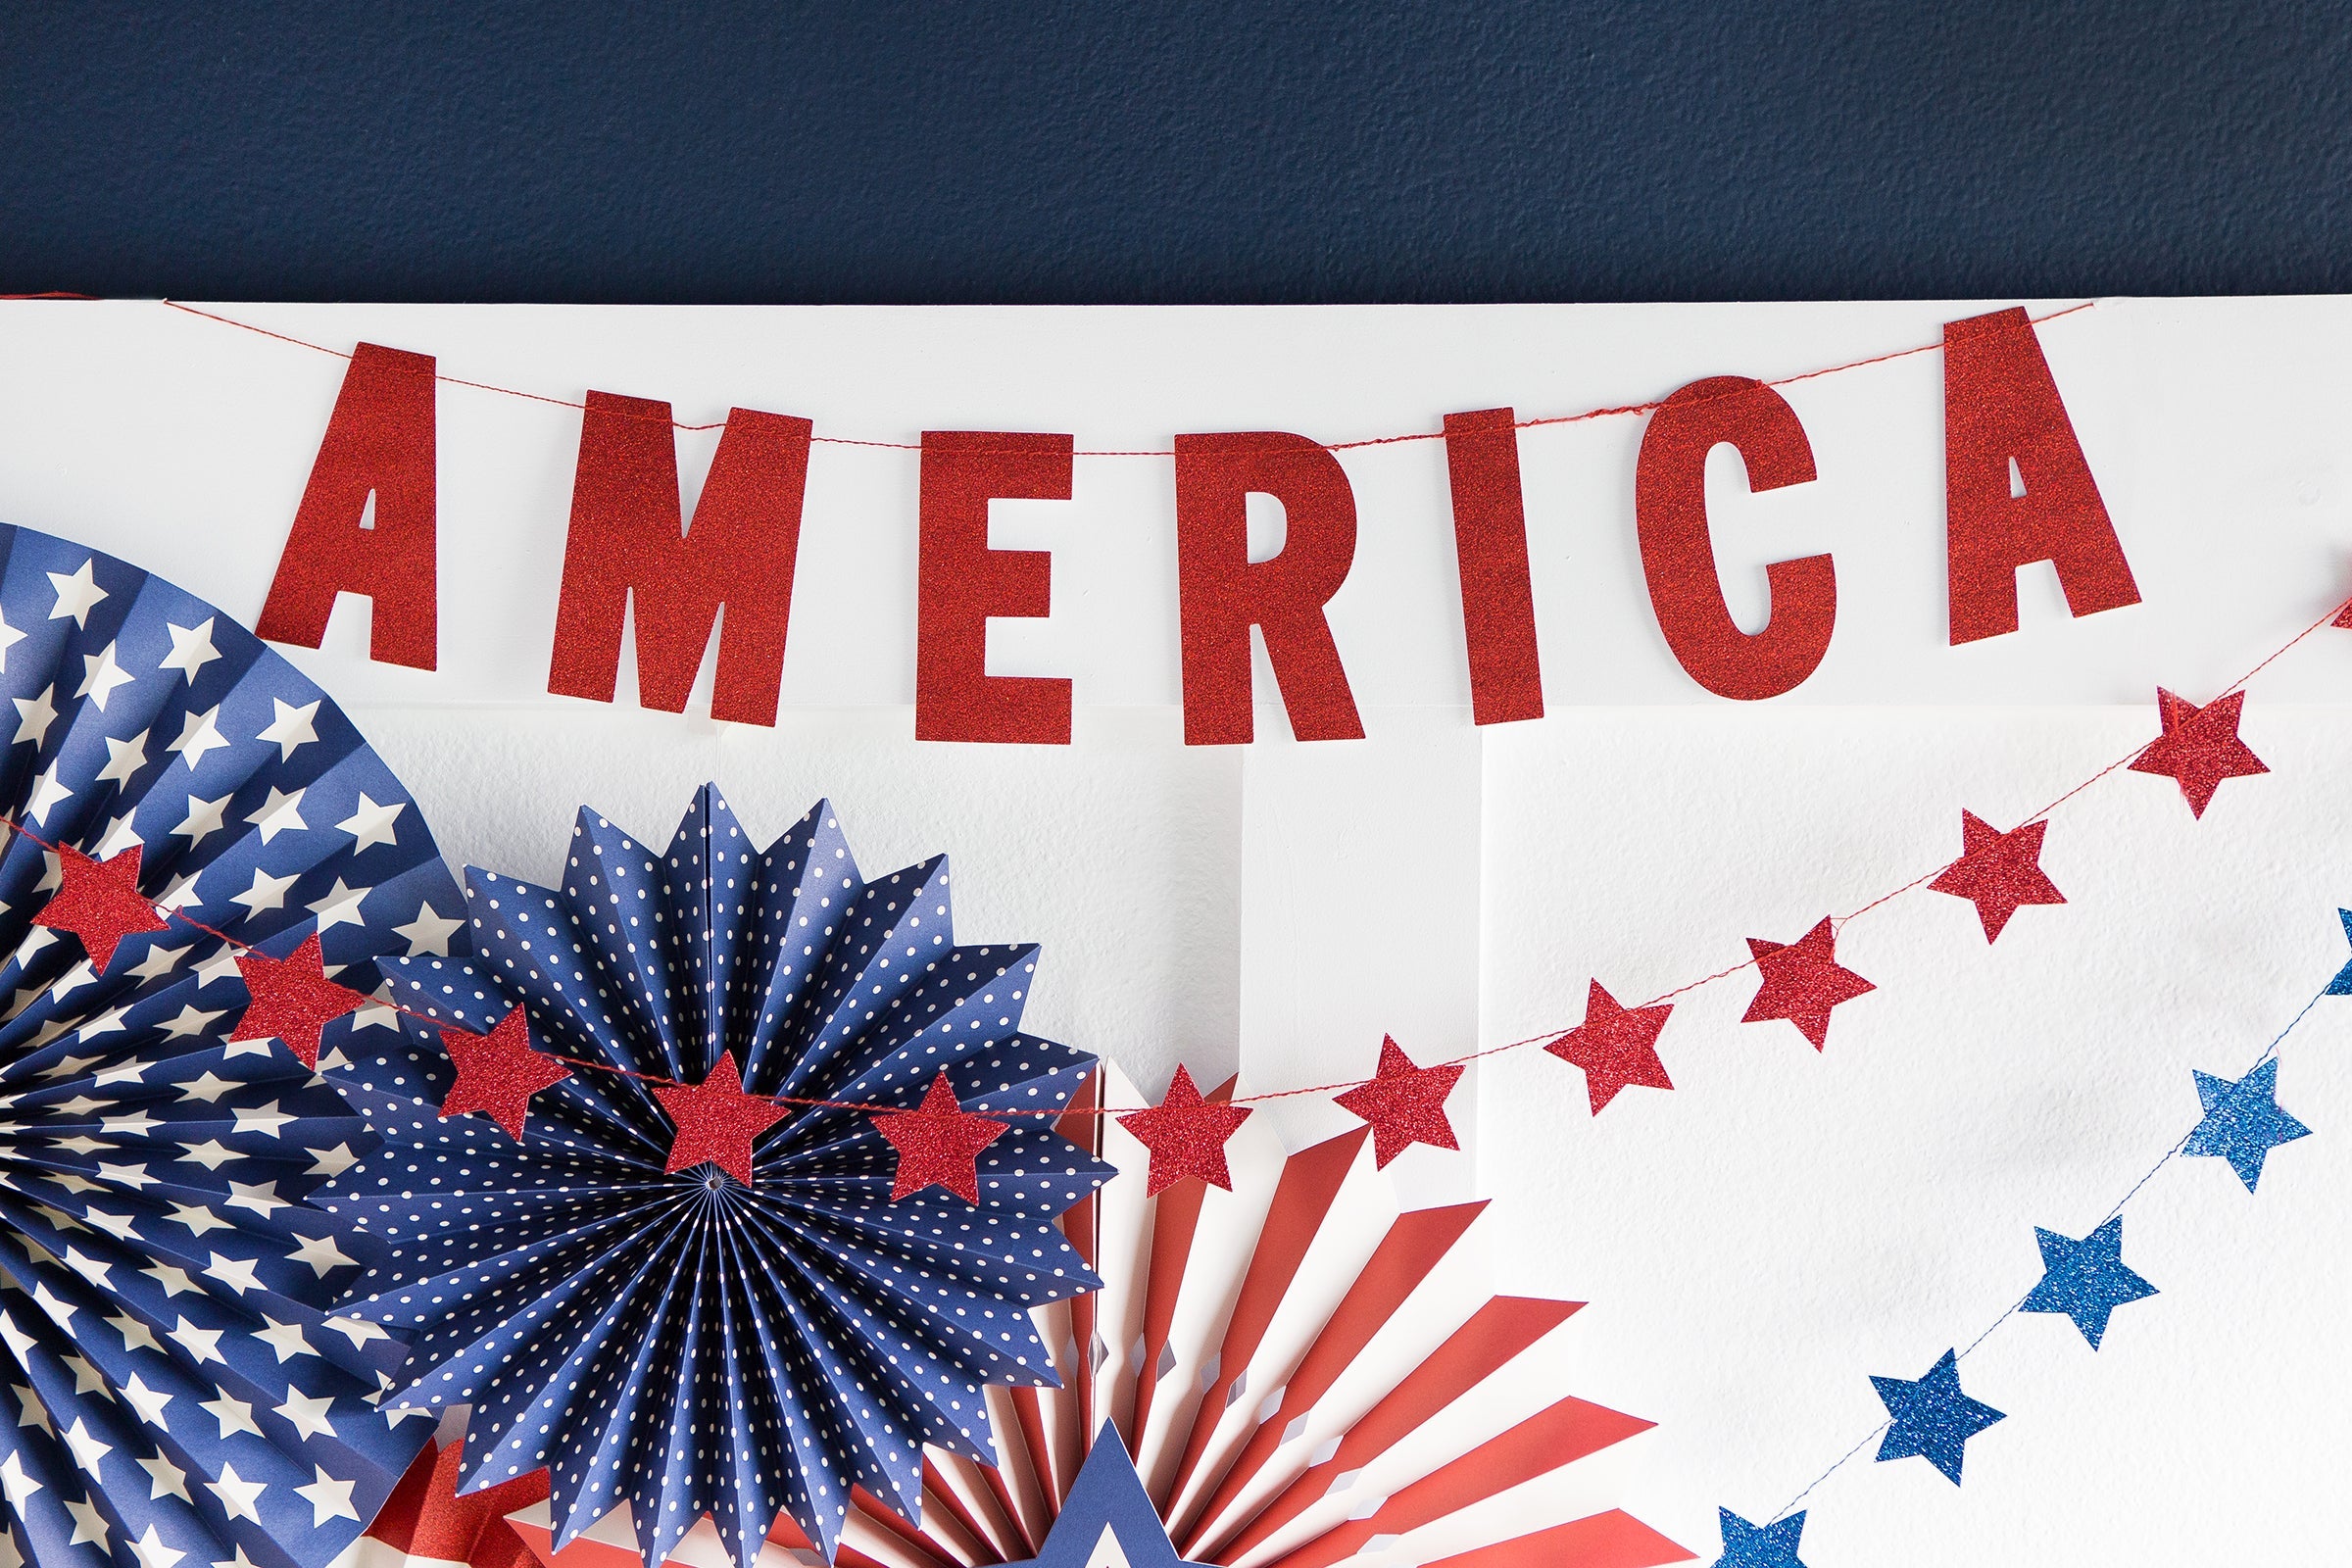 Oh So Fancy Party has all of the Americana inspiration and party supplies to create a sparkly red, white, and blue celebration.